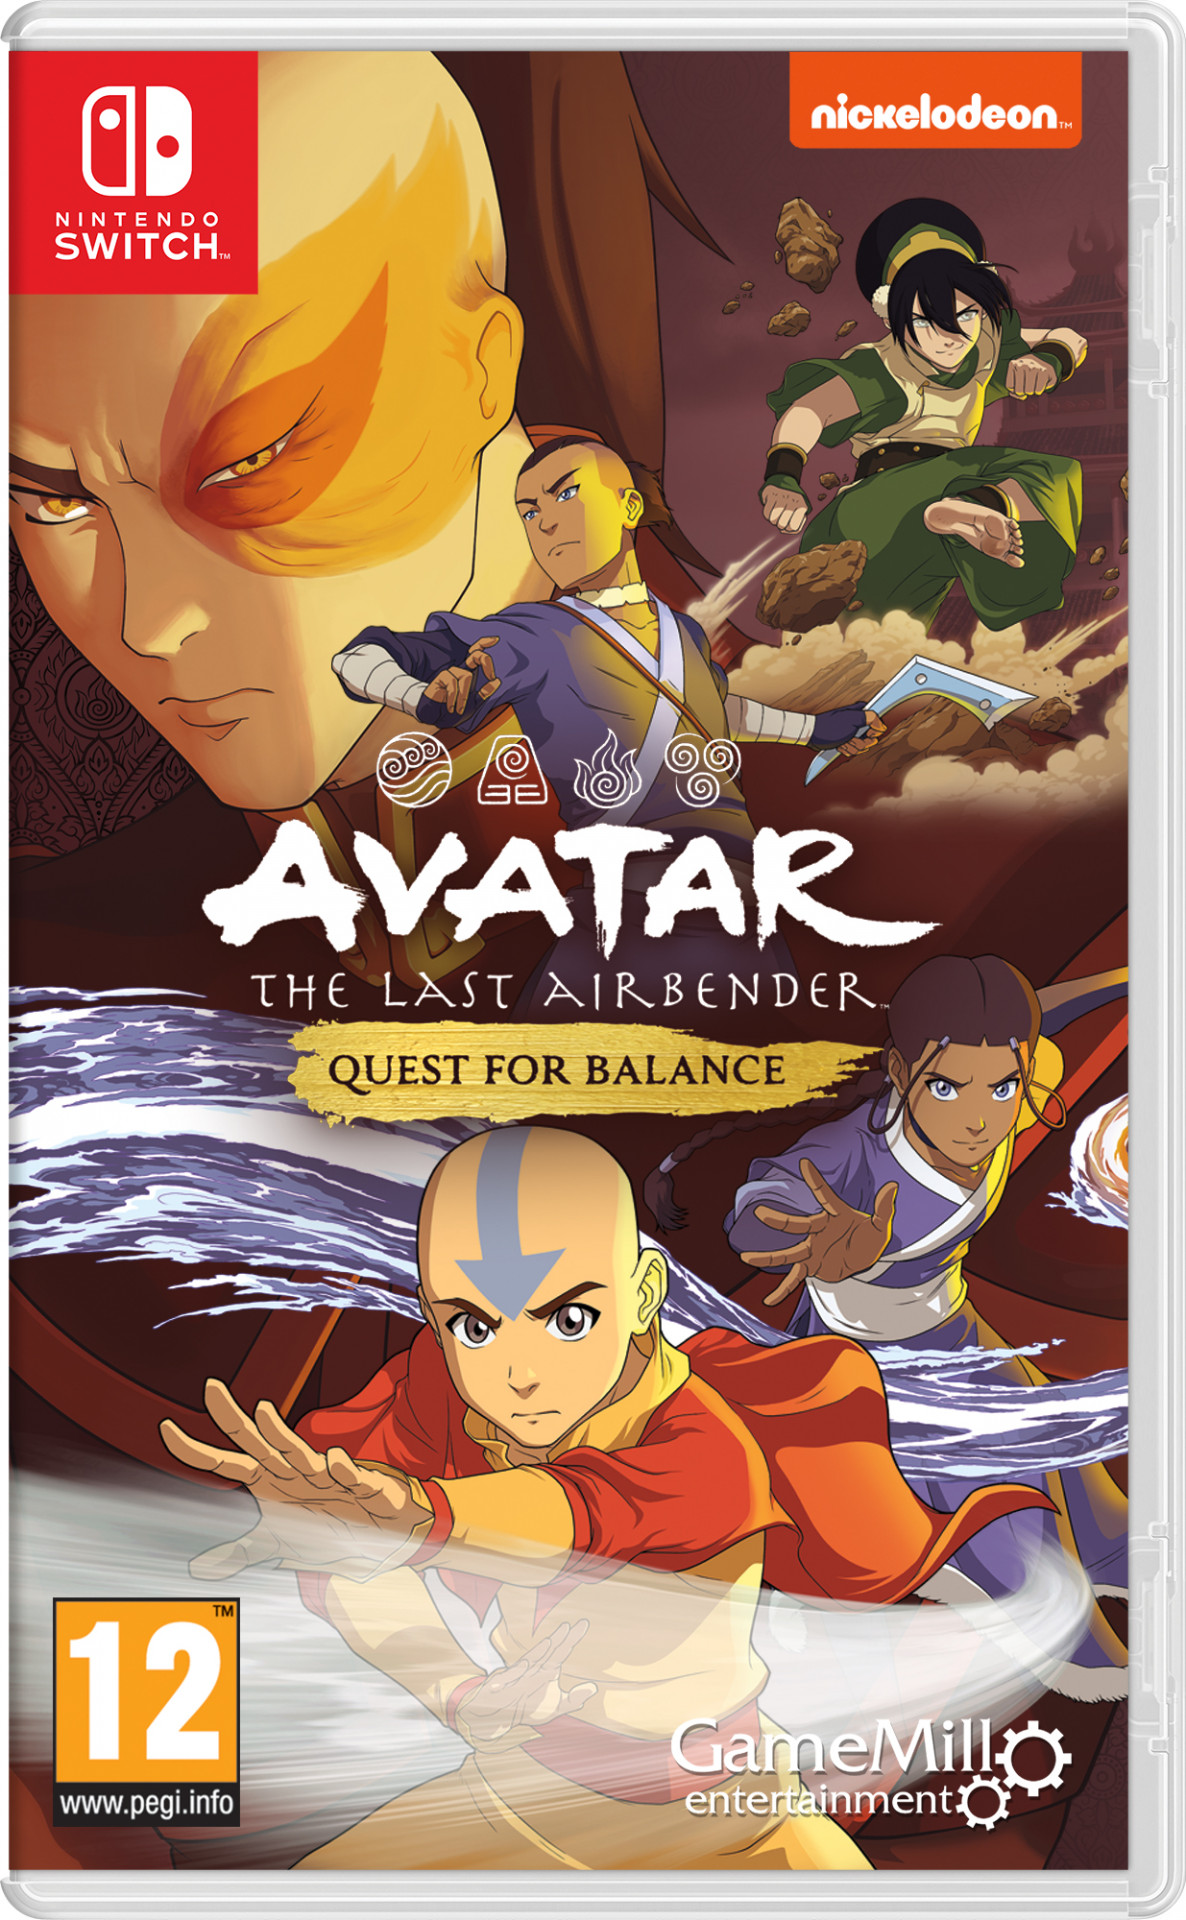 Avatar The Last Airbender: Quest for Balance (Switch), GameMill Entertainment